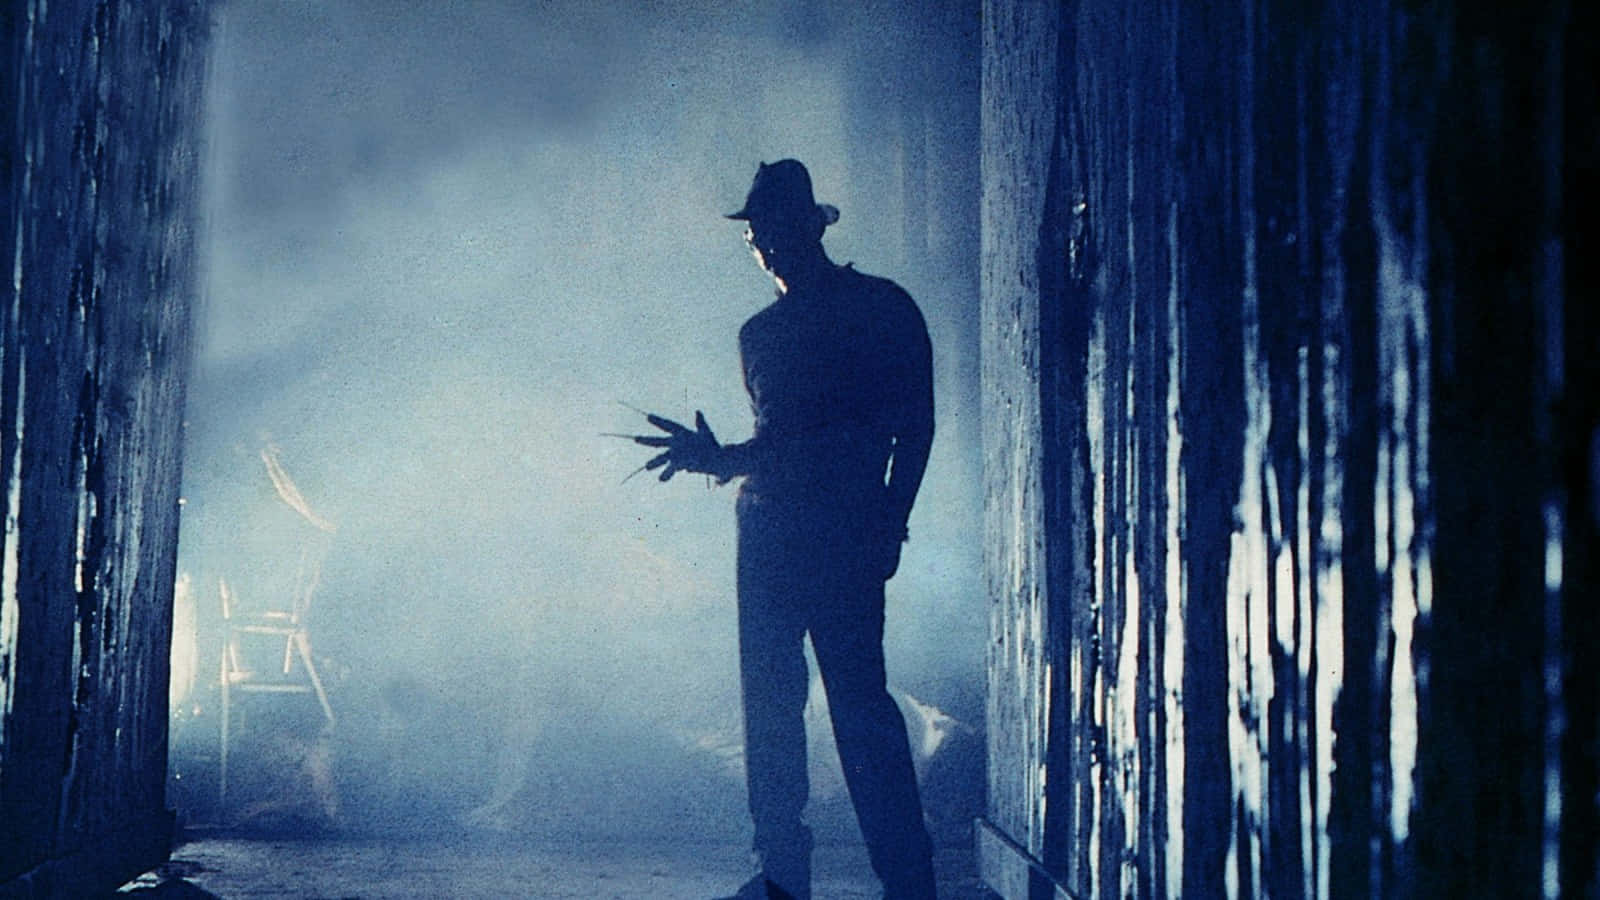 Freddy Krueger menacingly stares with his infamous glove and hat in a dark atmosphere